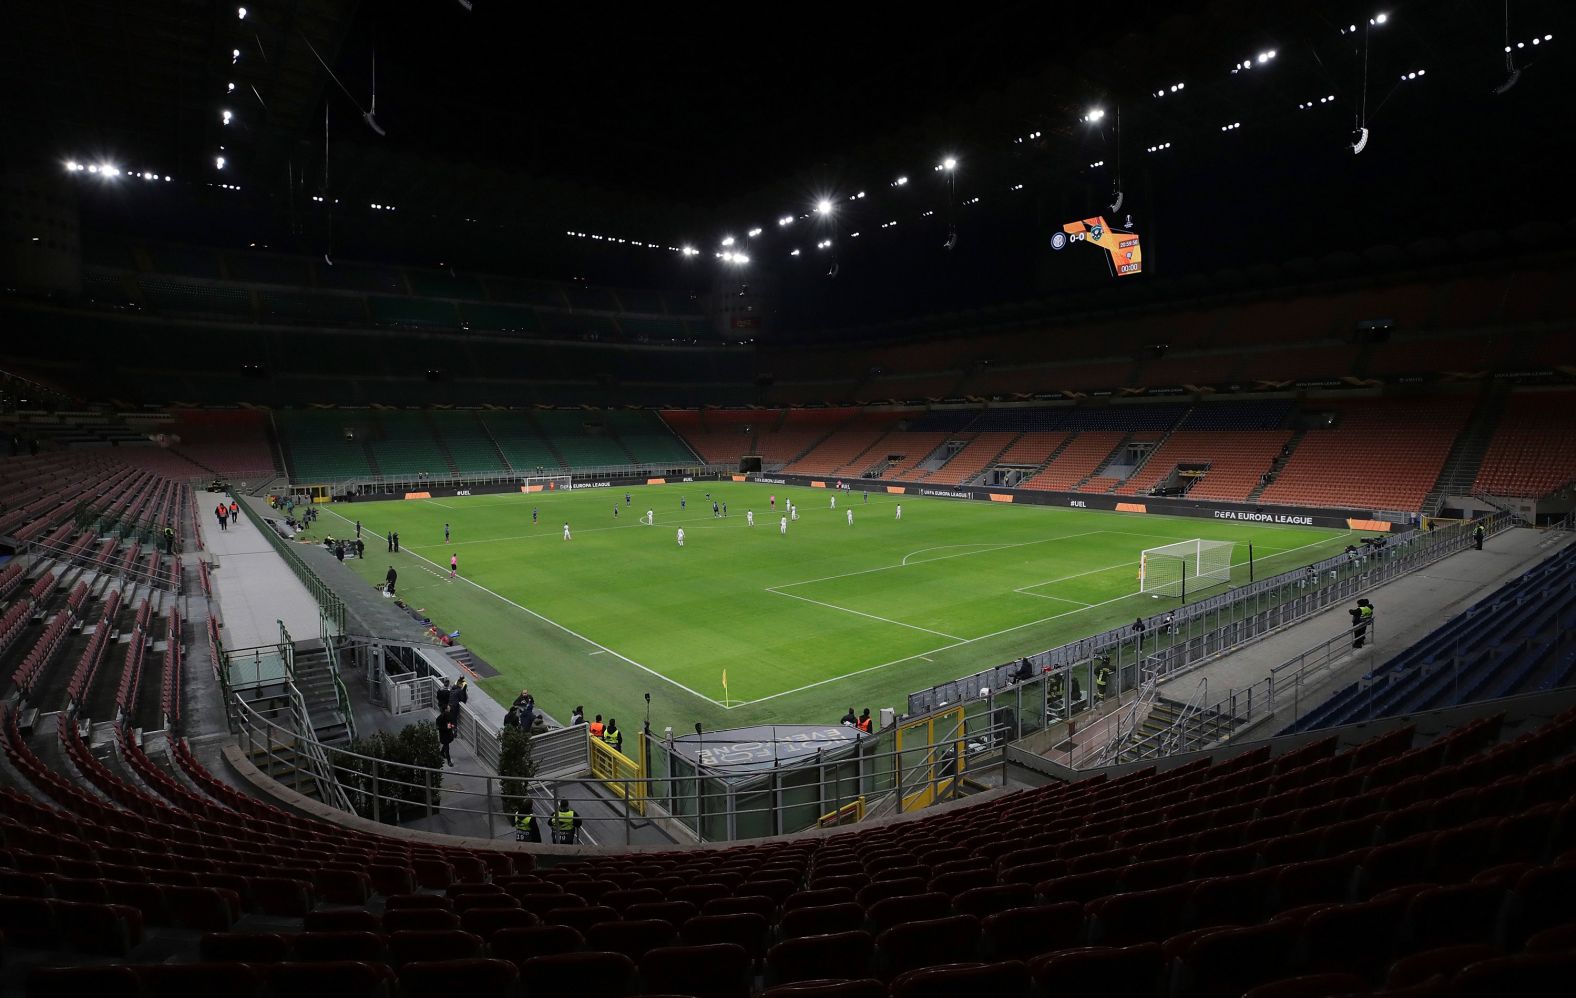 Inter Milan plays Ludogorets in an empty soccer stadium in Milan, Italy, on February 27, 2020. The match <a href="https://edition.cnn.com/2020/02/28/football/inter-milan-coronavirus-ludogorets-football-spt-intl/index.html" target="_blank">was ordered to be played behind closed doors</a> as Italian authorities continued to grapple with the coronavirus outbreak.